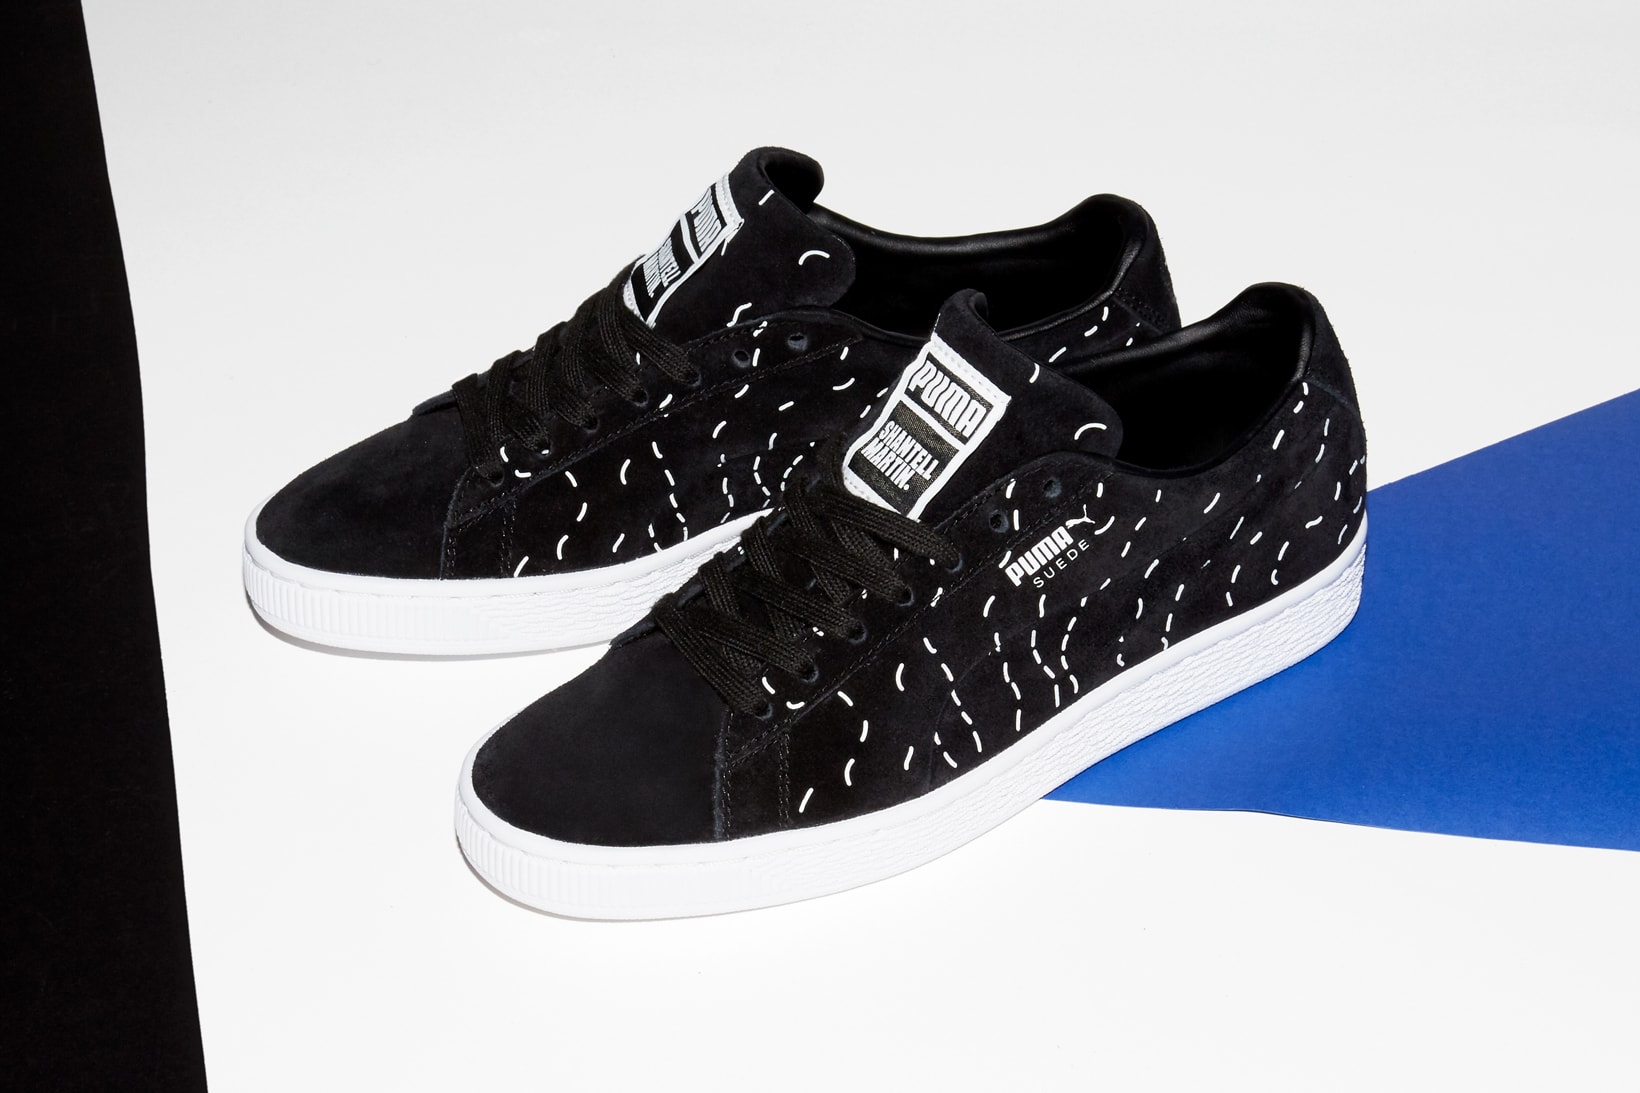 Shantell Martin x PUMA Spring/Summer 2018 Collection Black Suede Sneakers